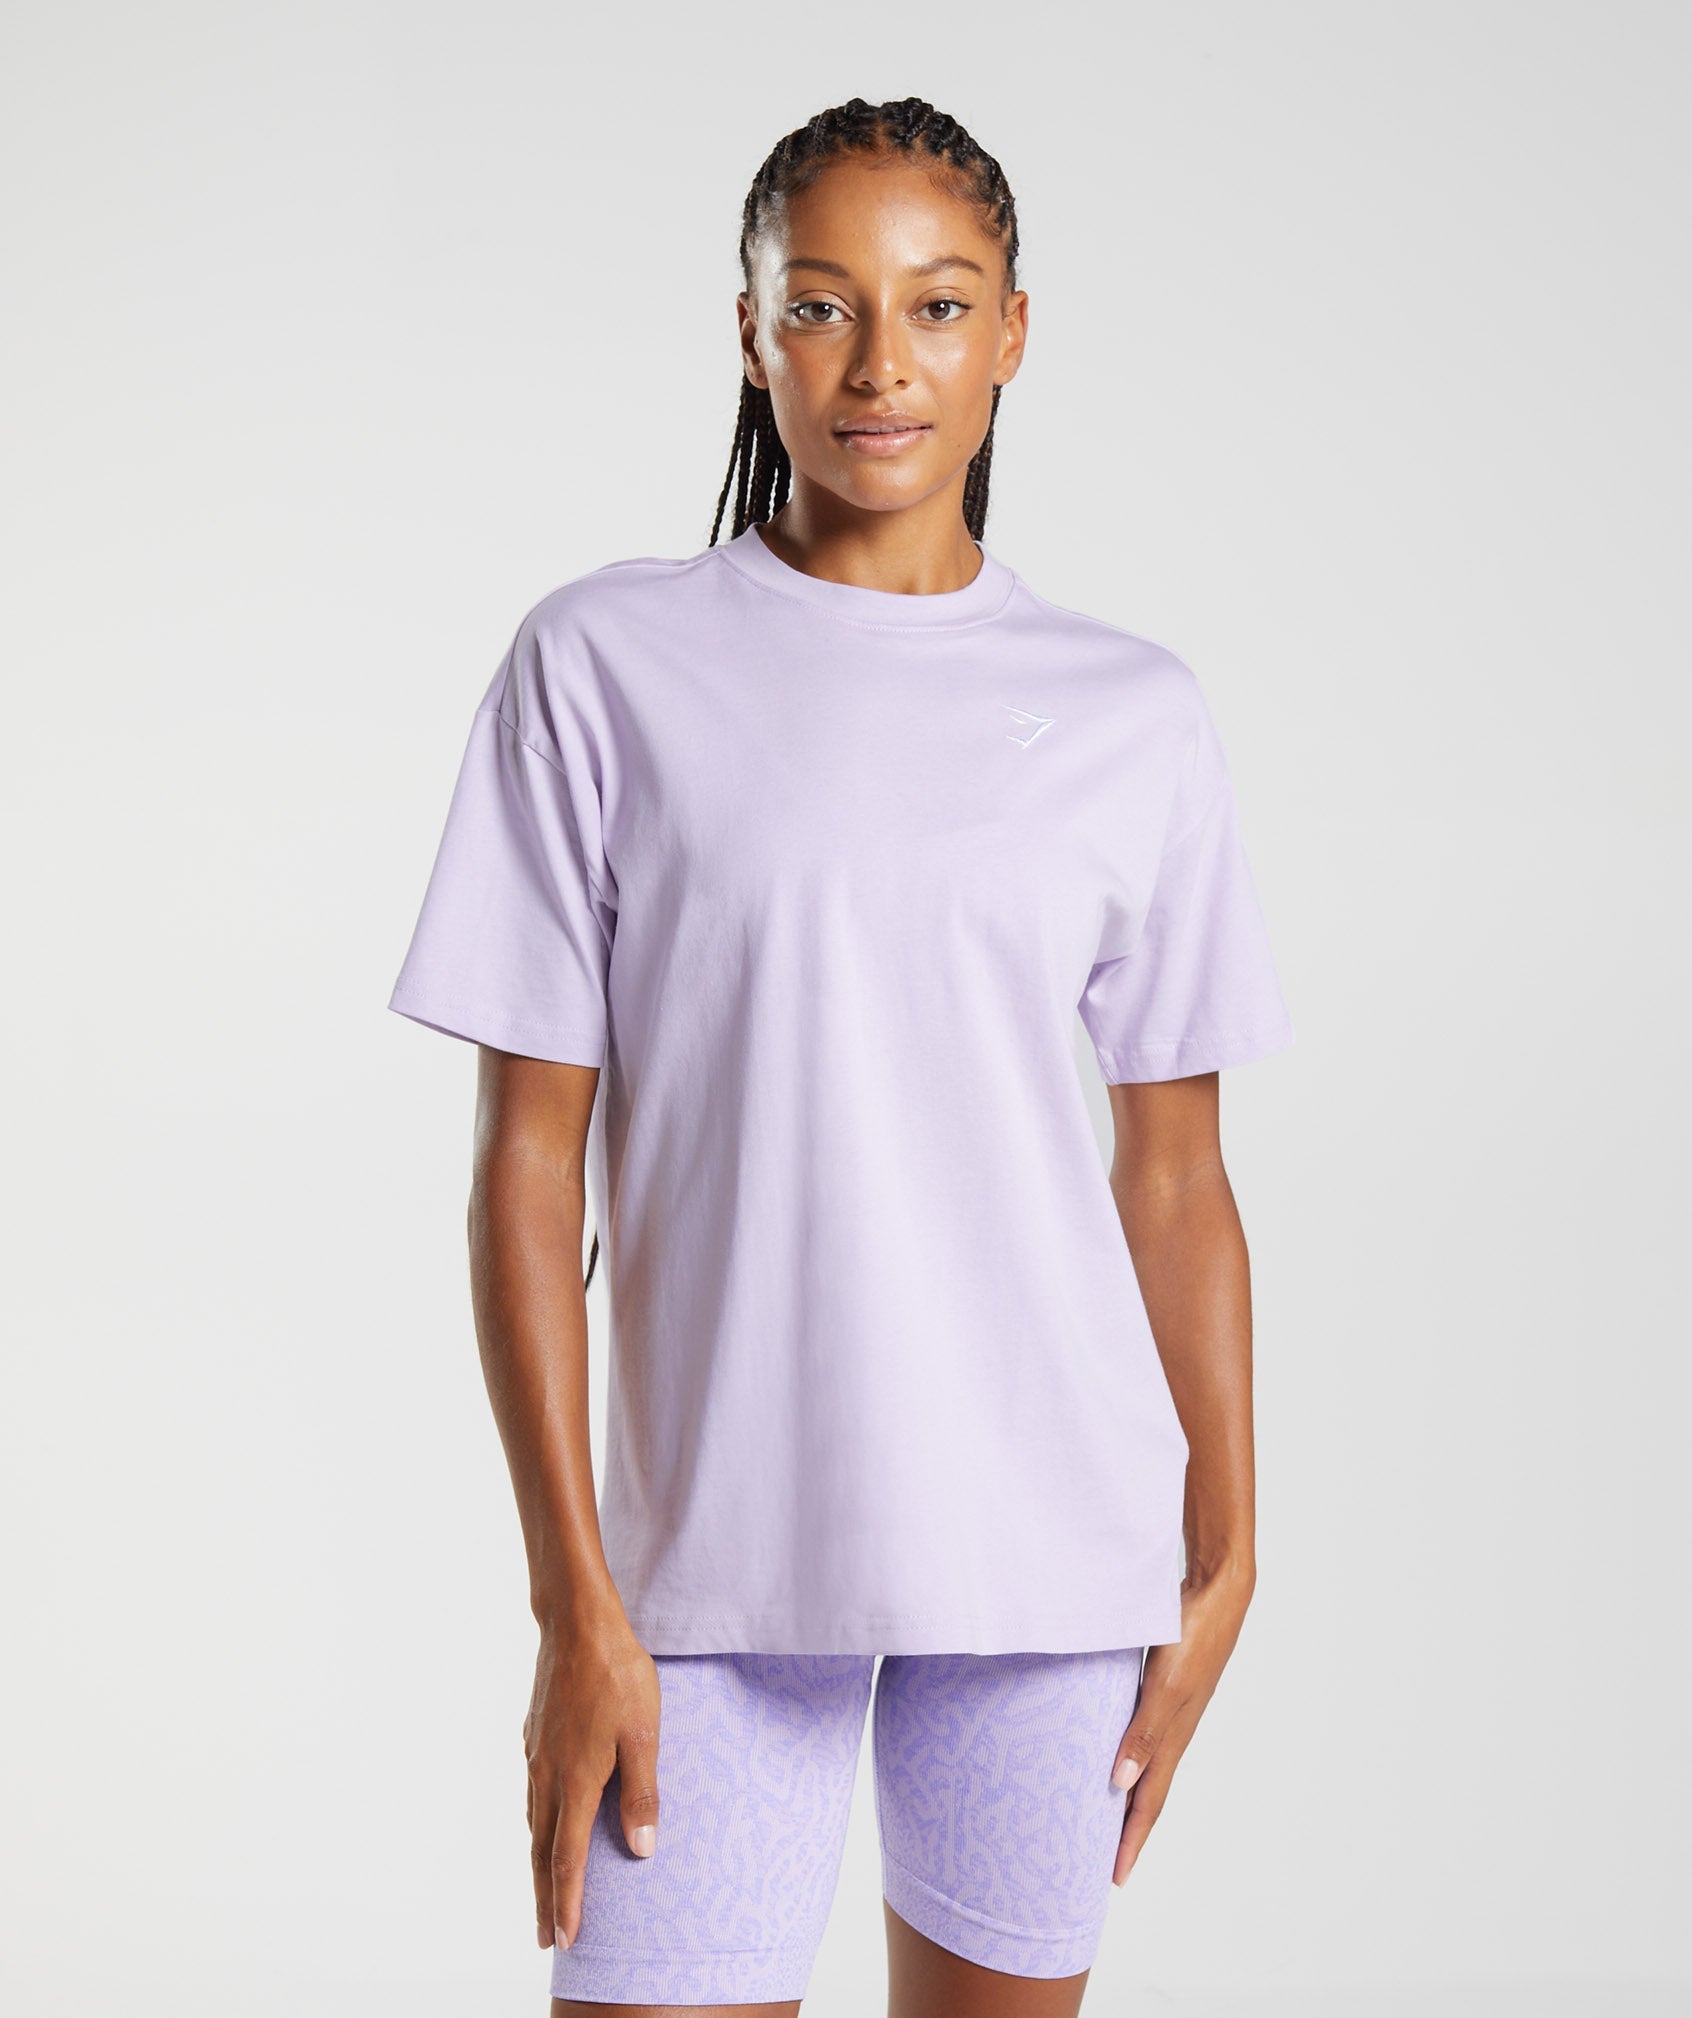 Training Oversized T-shirt in Soft Lilac - view 1